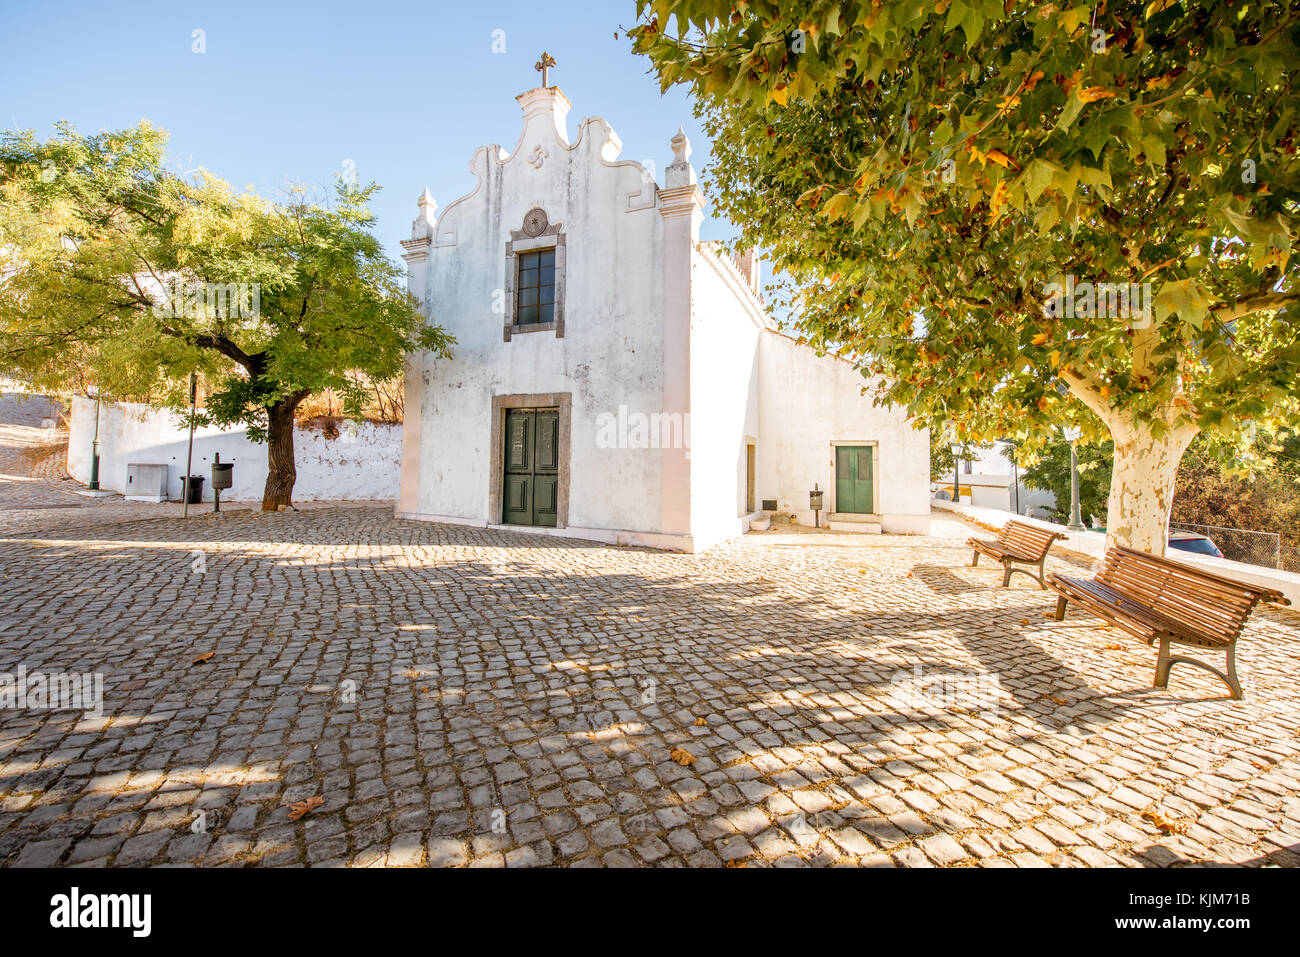 Alte village on the south of Portugal Stock Photo